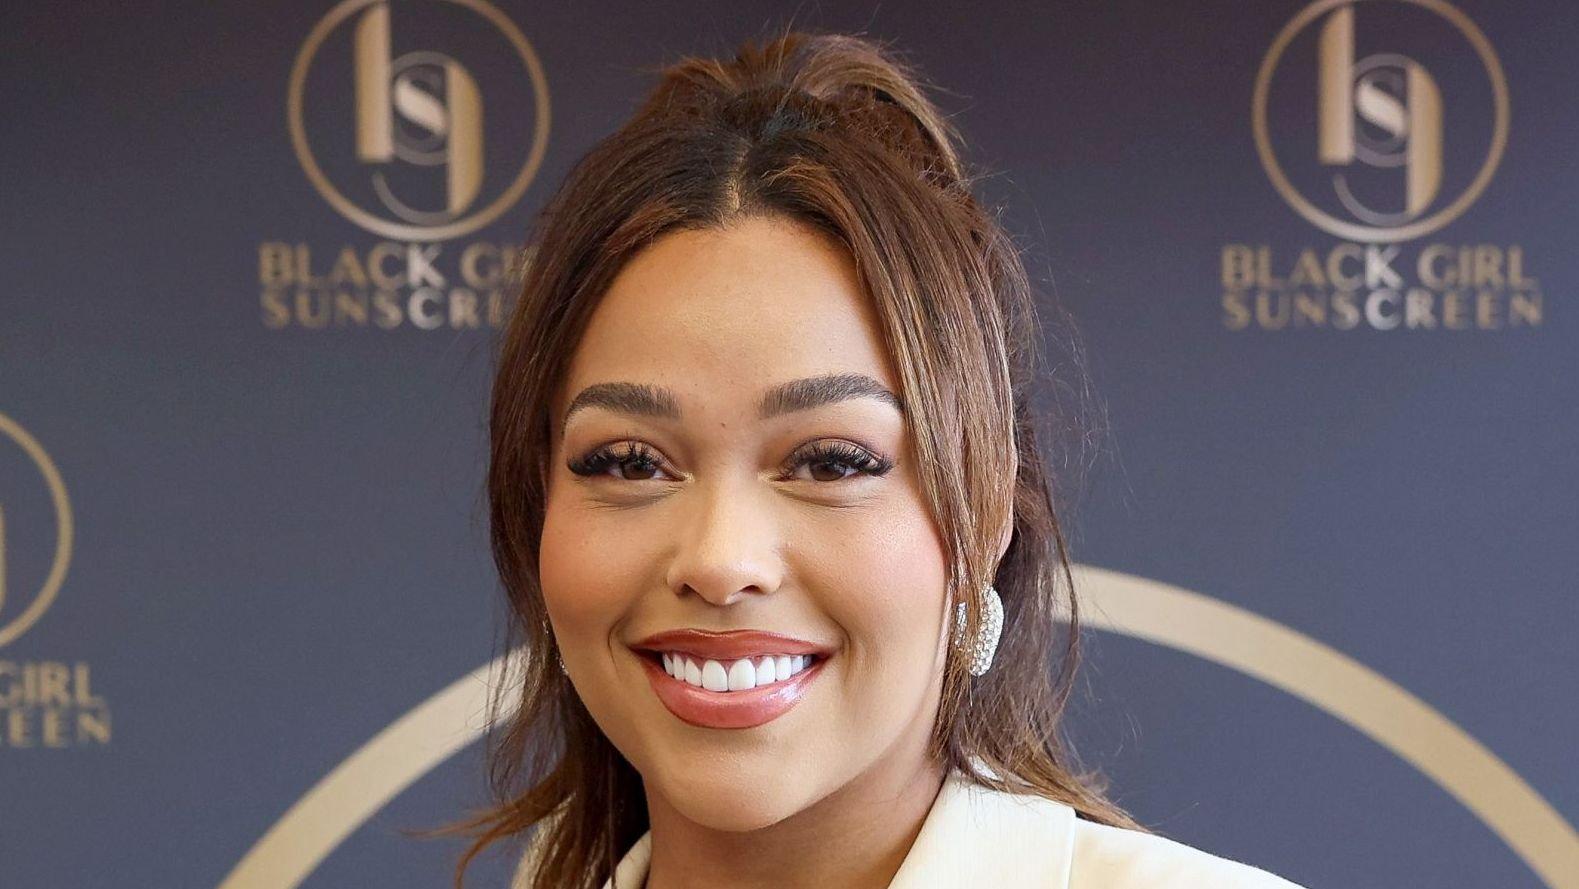 Close-up picture of Jordyn Woods smiling